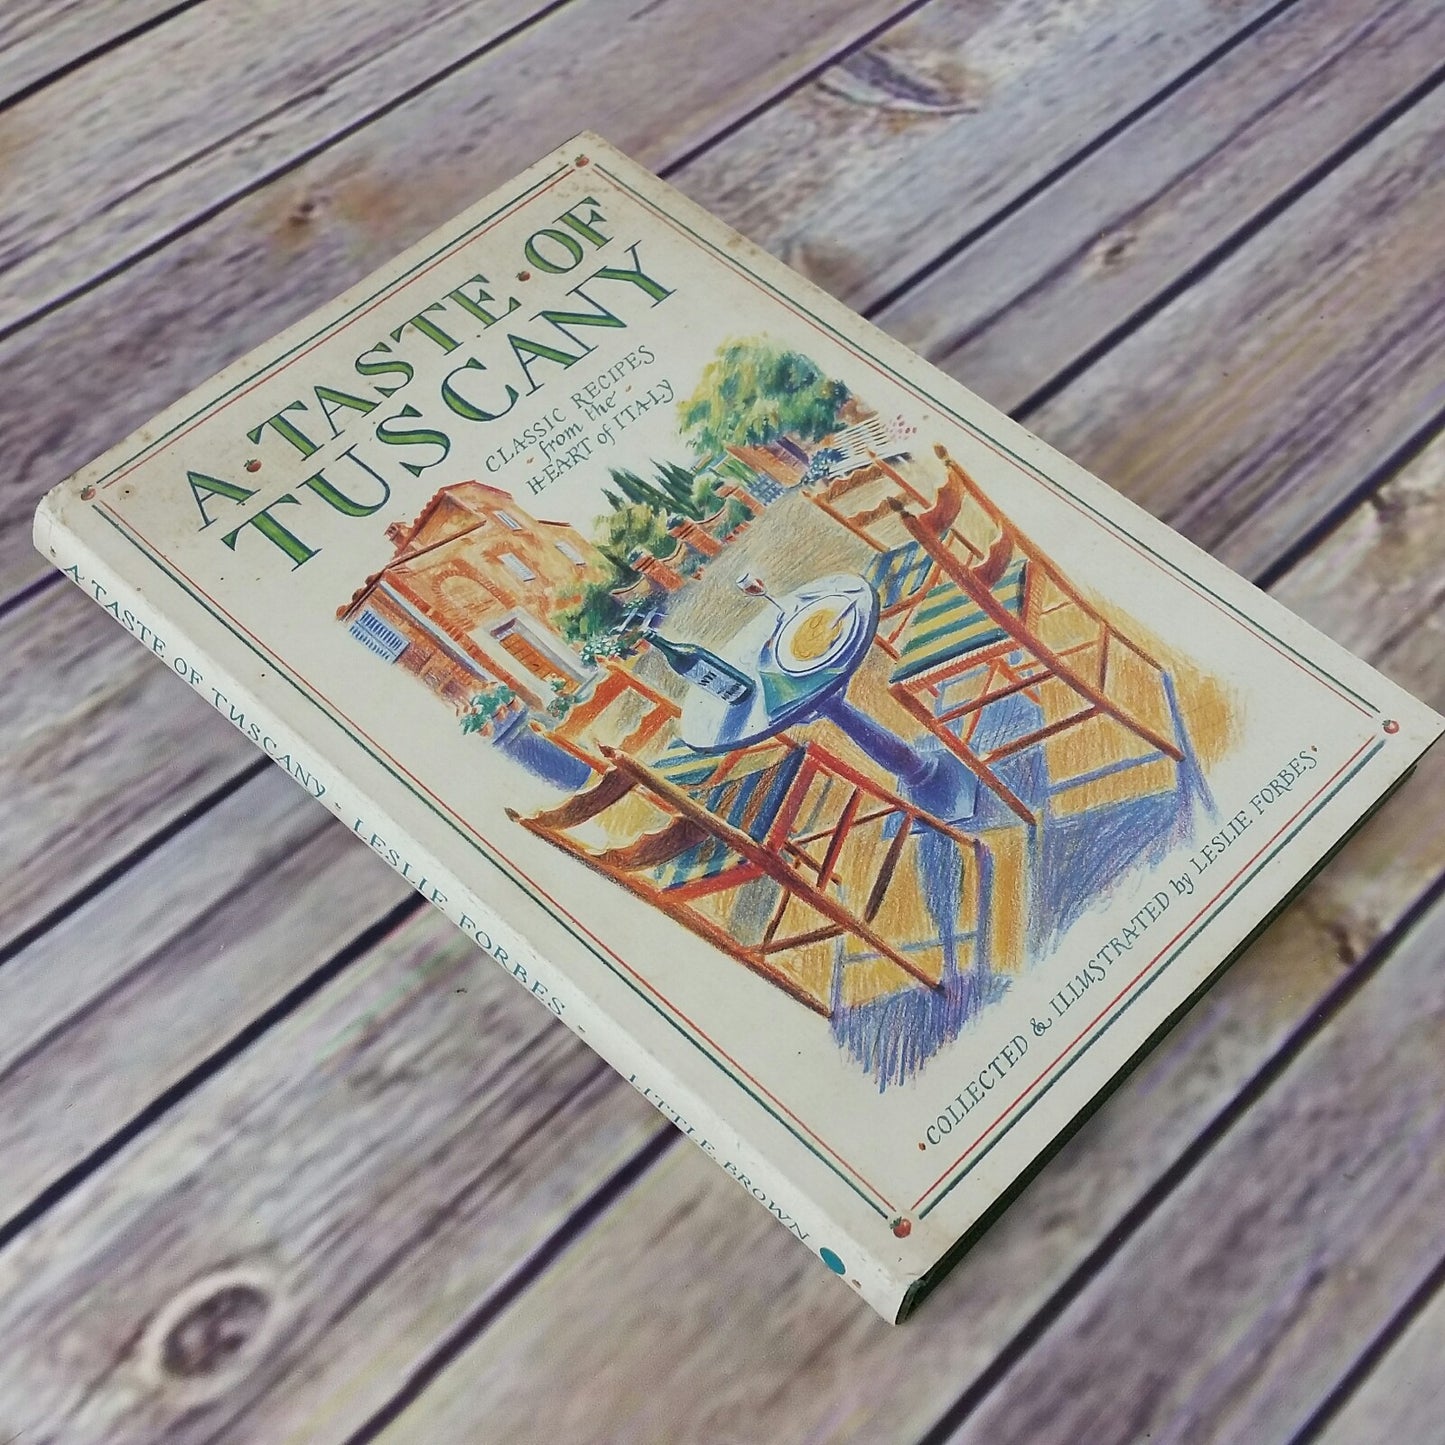 Vintage Italian Cooking Cookbook A Taste of Tuscany Leslie Forbes 1985 Hardcover Recipes - At Grandma's Table